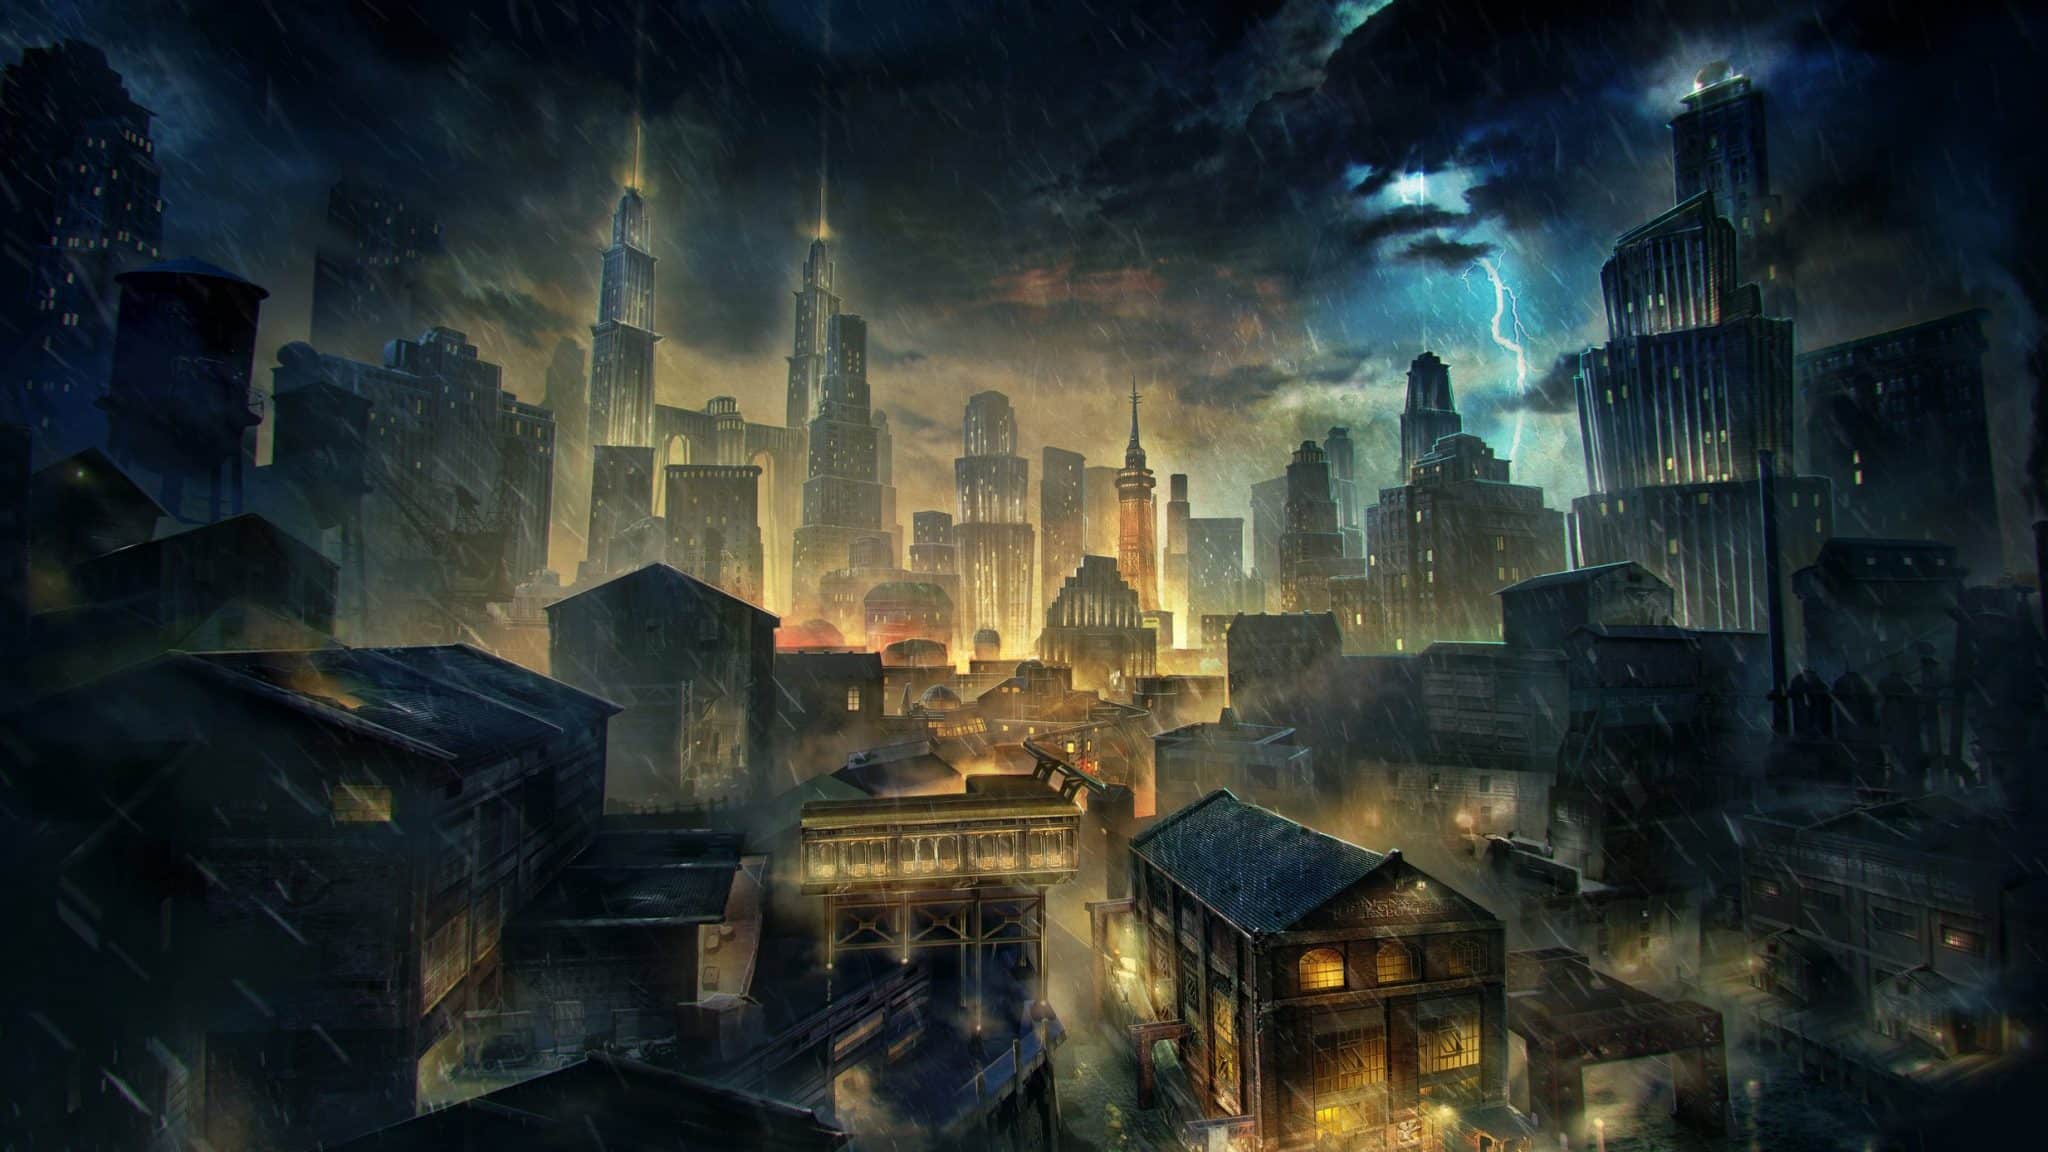 Black Ops 3 Zombies: Shadows Of Evil Official Concept Art